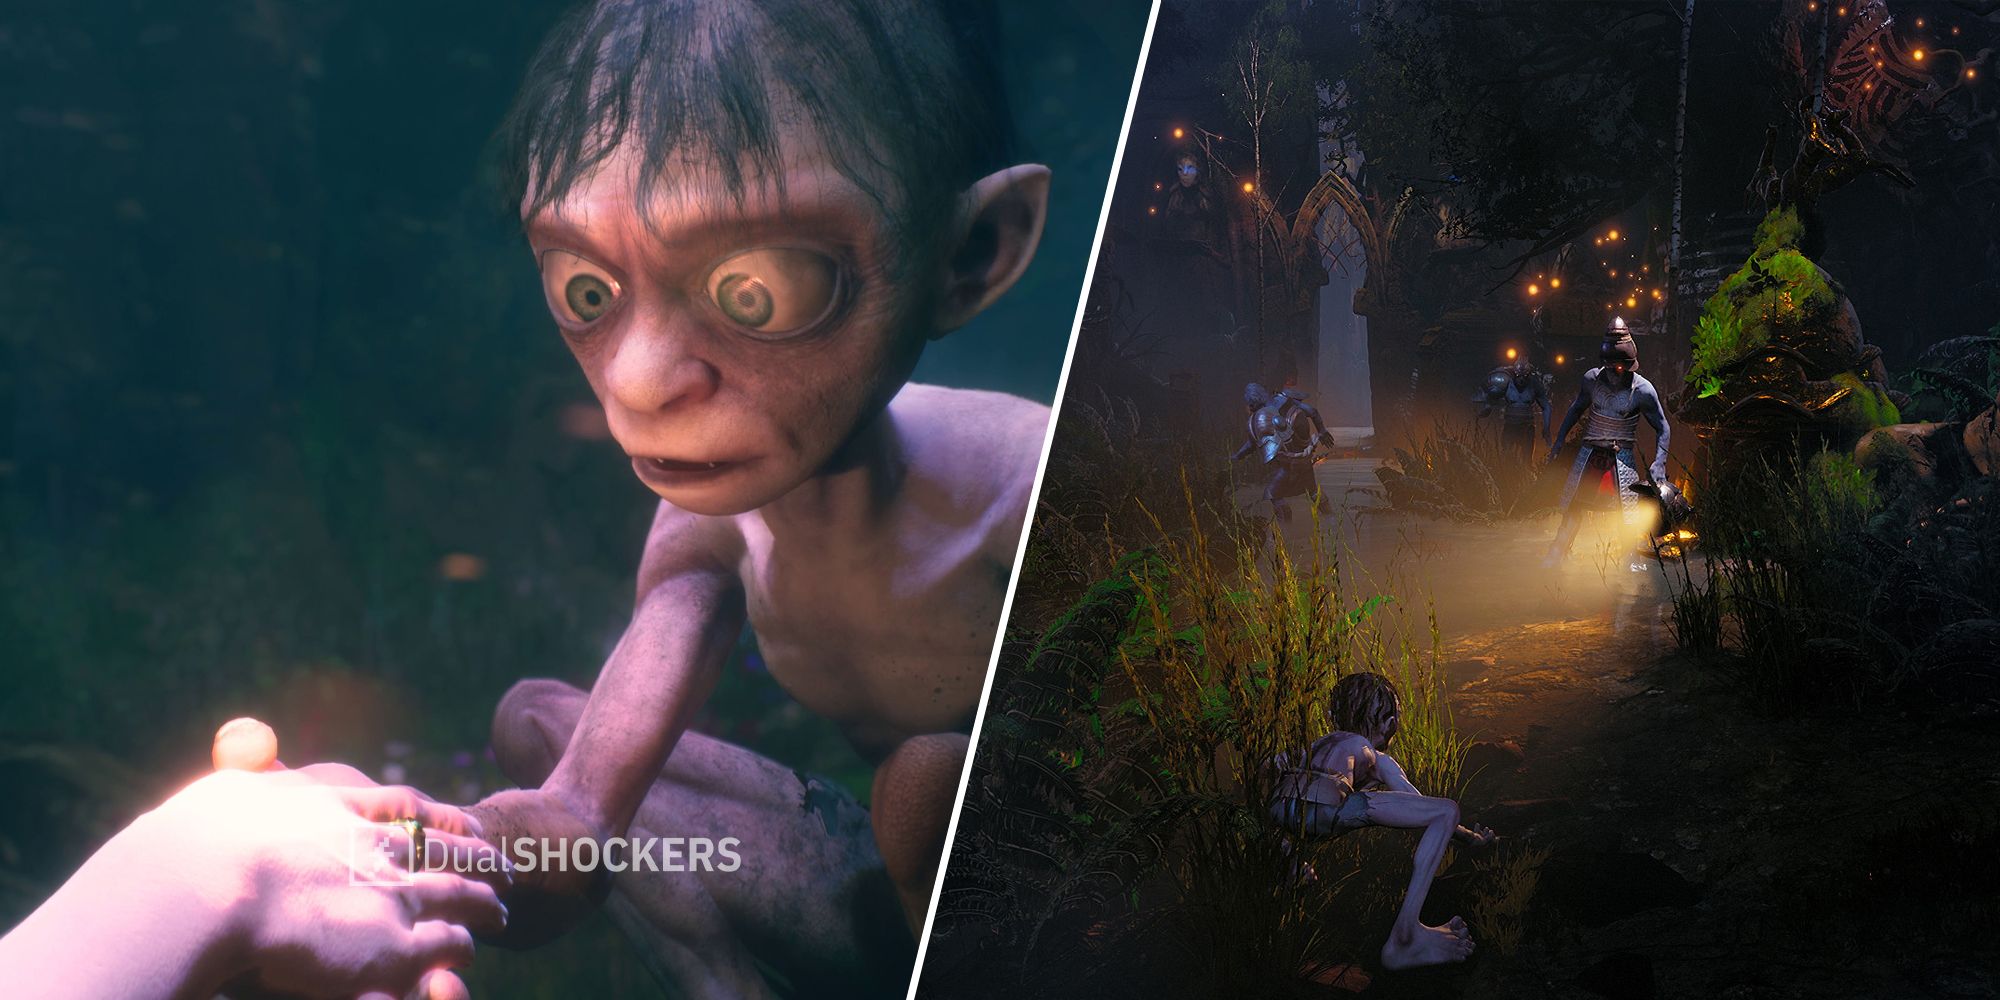 The Lord of the Rings: Gollum New Teaser Trailer Released During the Game  Awards